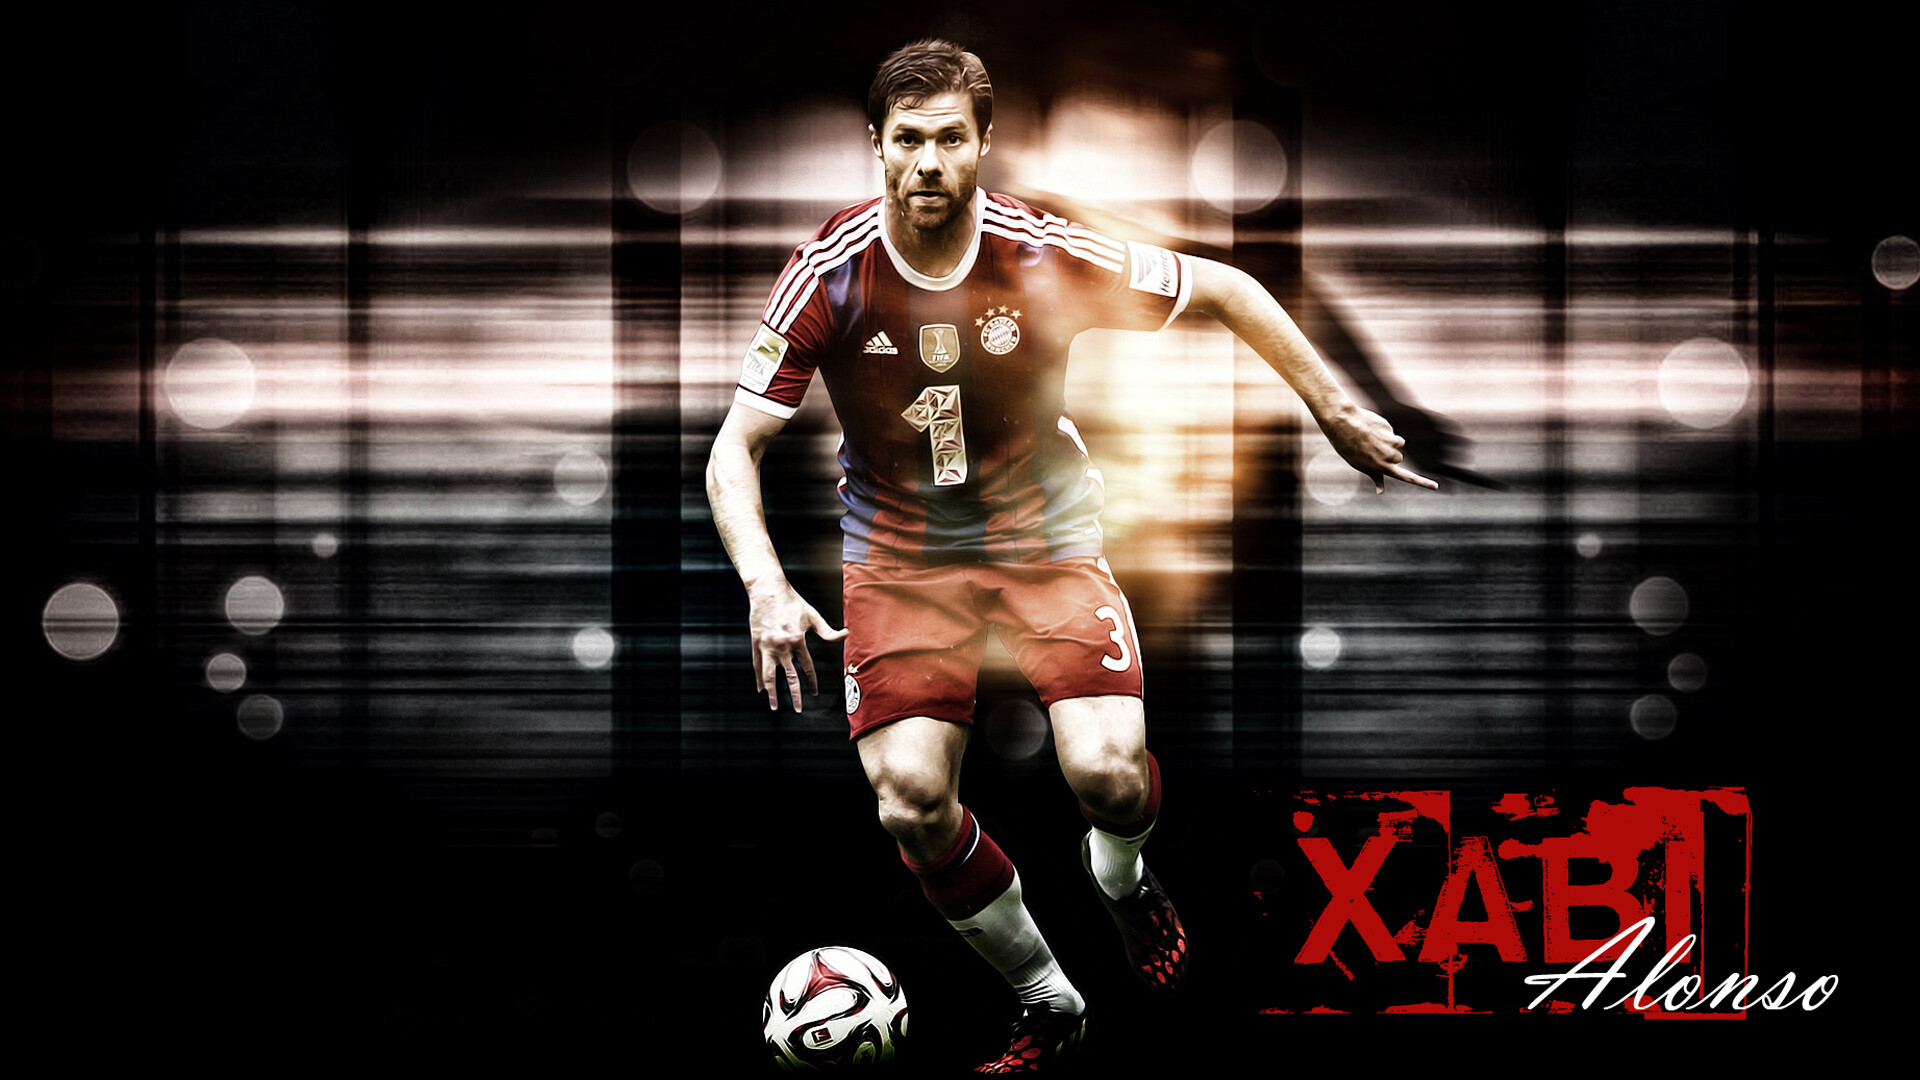 Germany Soccer Team: Xabi Alonso, A Spanish football manager and a former professional central or defensive midfielder, Bayern Munich. 1920x1080 Full HD Wallpaper.